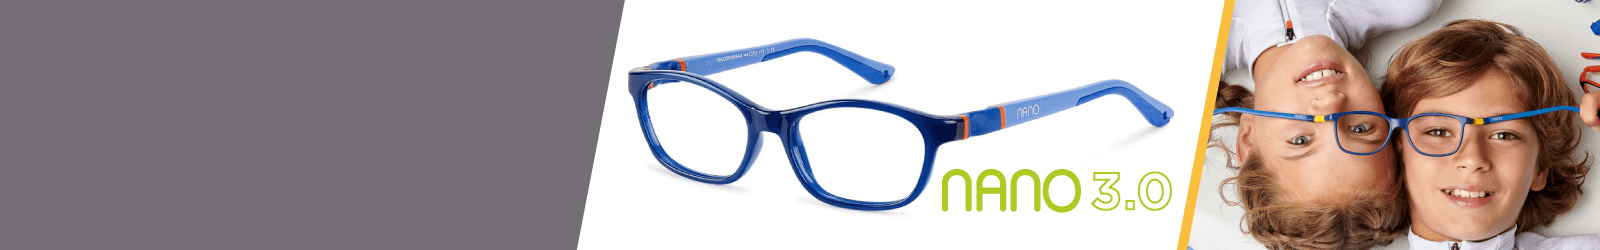 Havana Nano 3.0 Indestructible Kids Glasses from 6 to 8-year-old